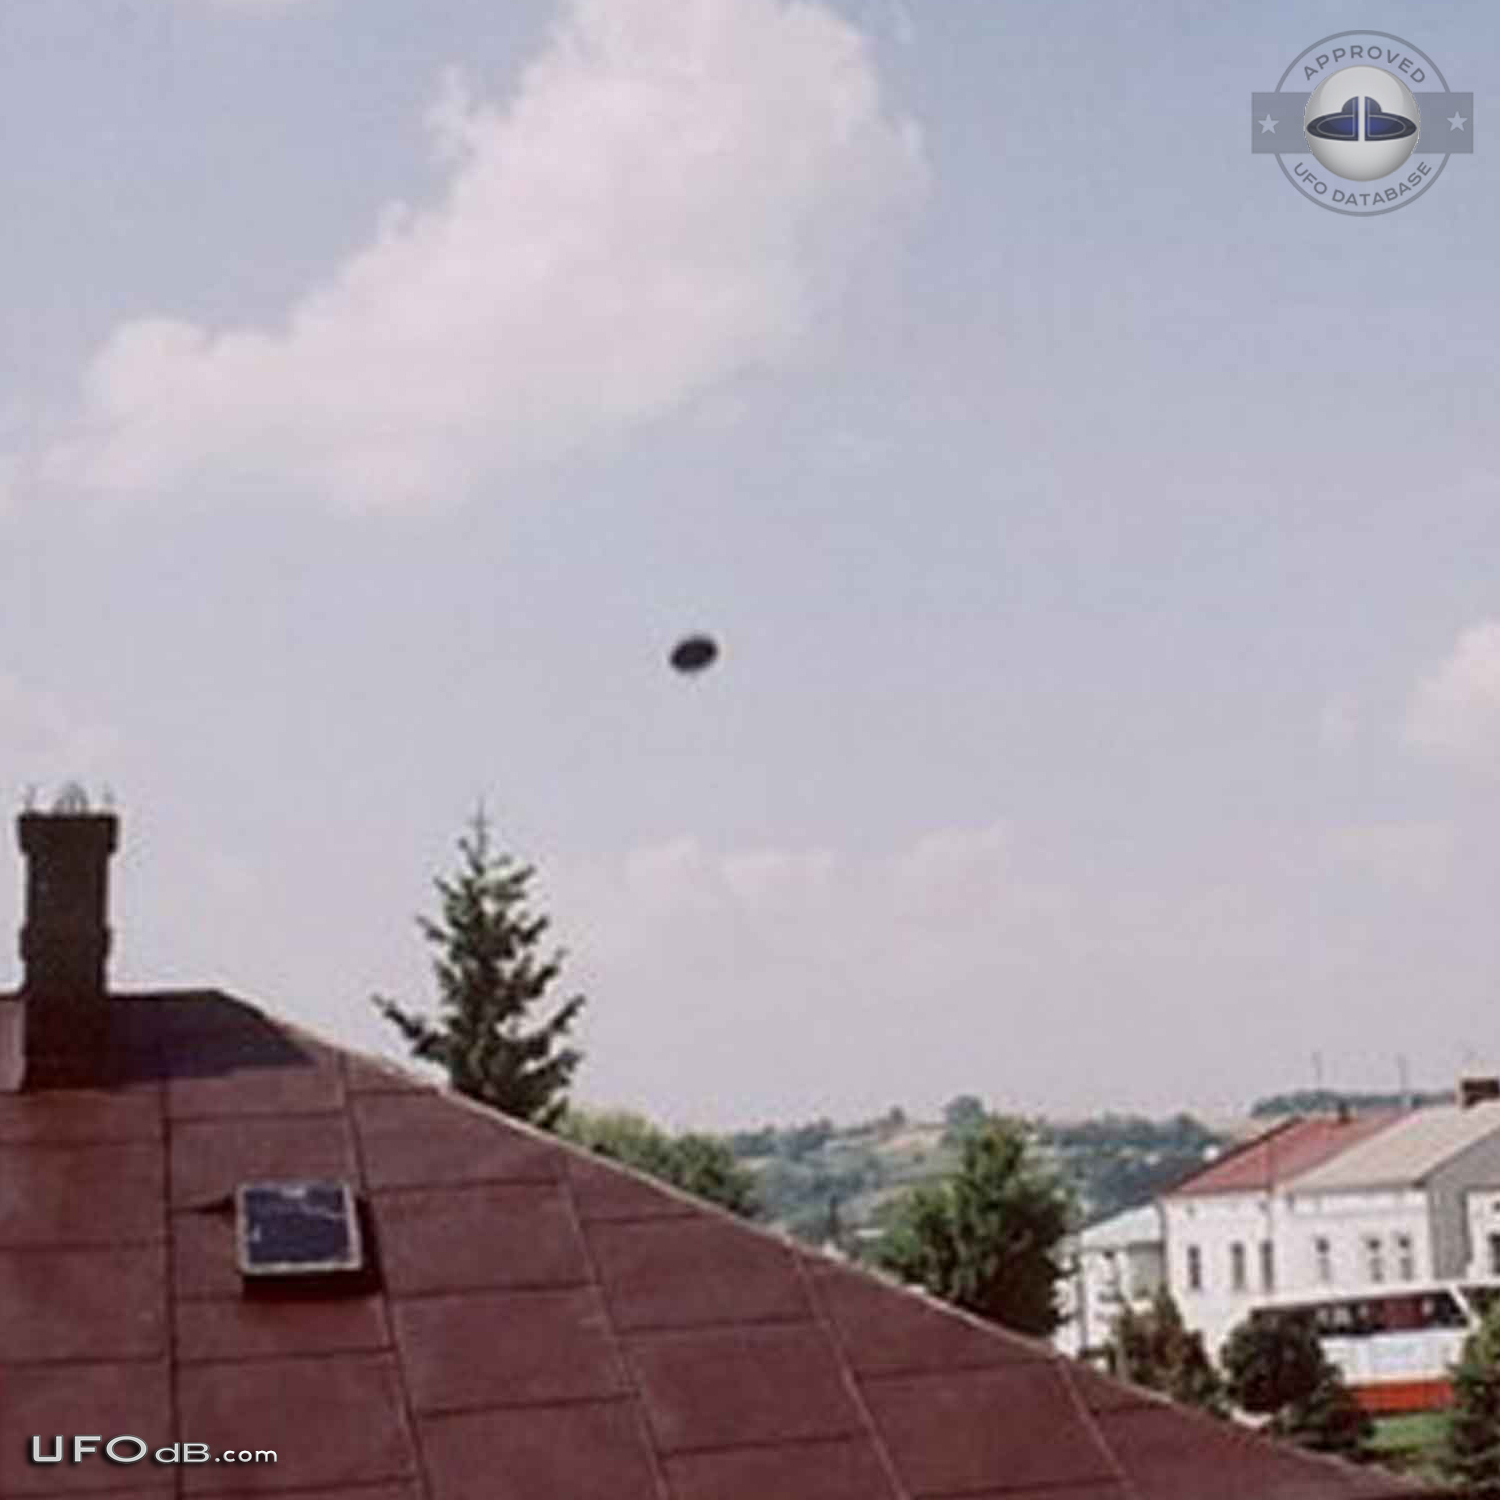 Poland 2003 Ufo sighting get aircrafts dispatched to check out the ufo UFO Picture #379-1